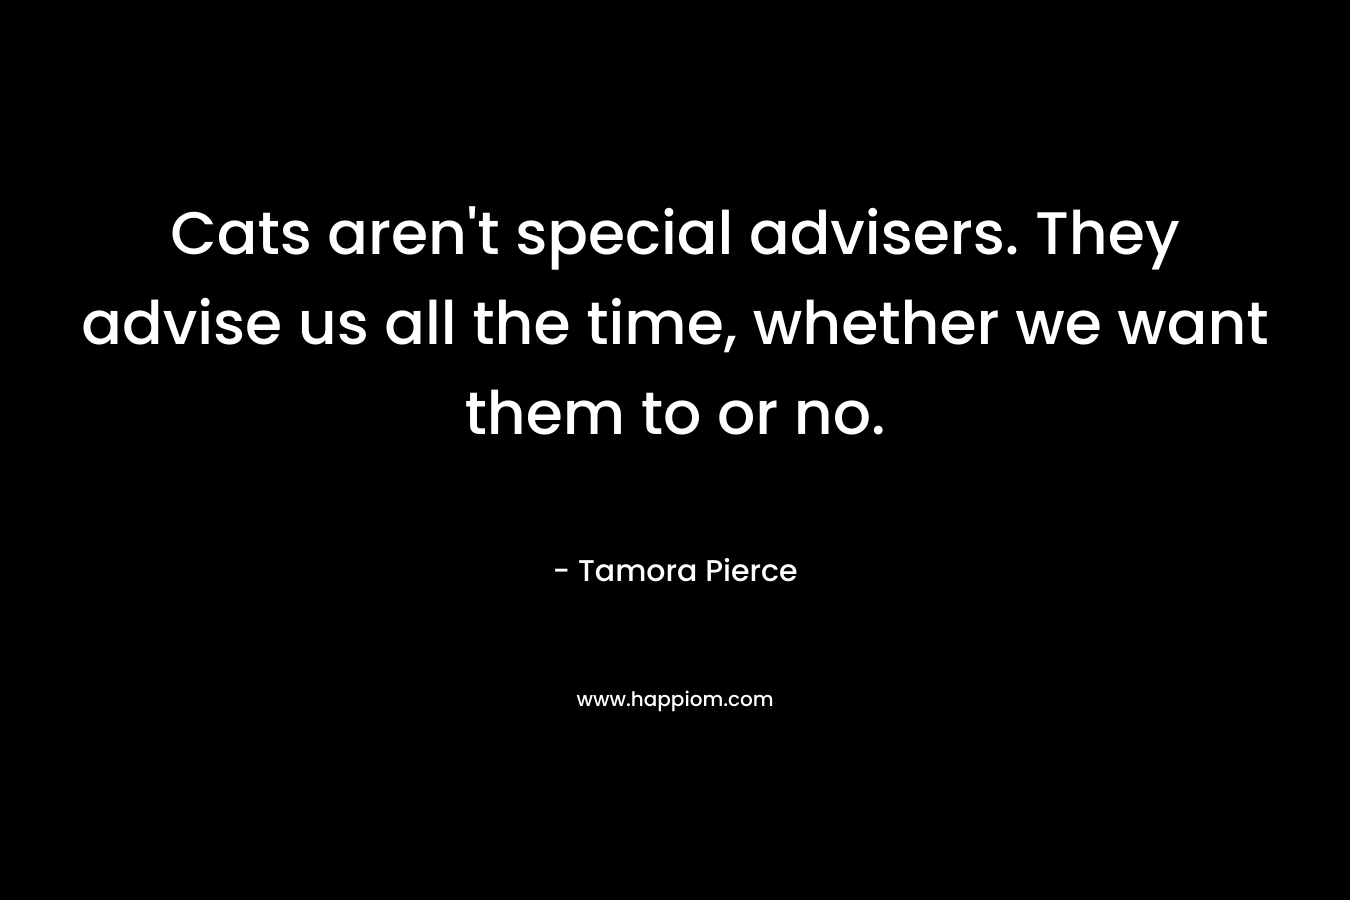 Cats aren’t special advisers. They advise us all the time, whether we want them to or no. – Tamora Pierce